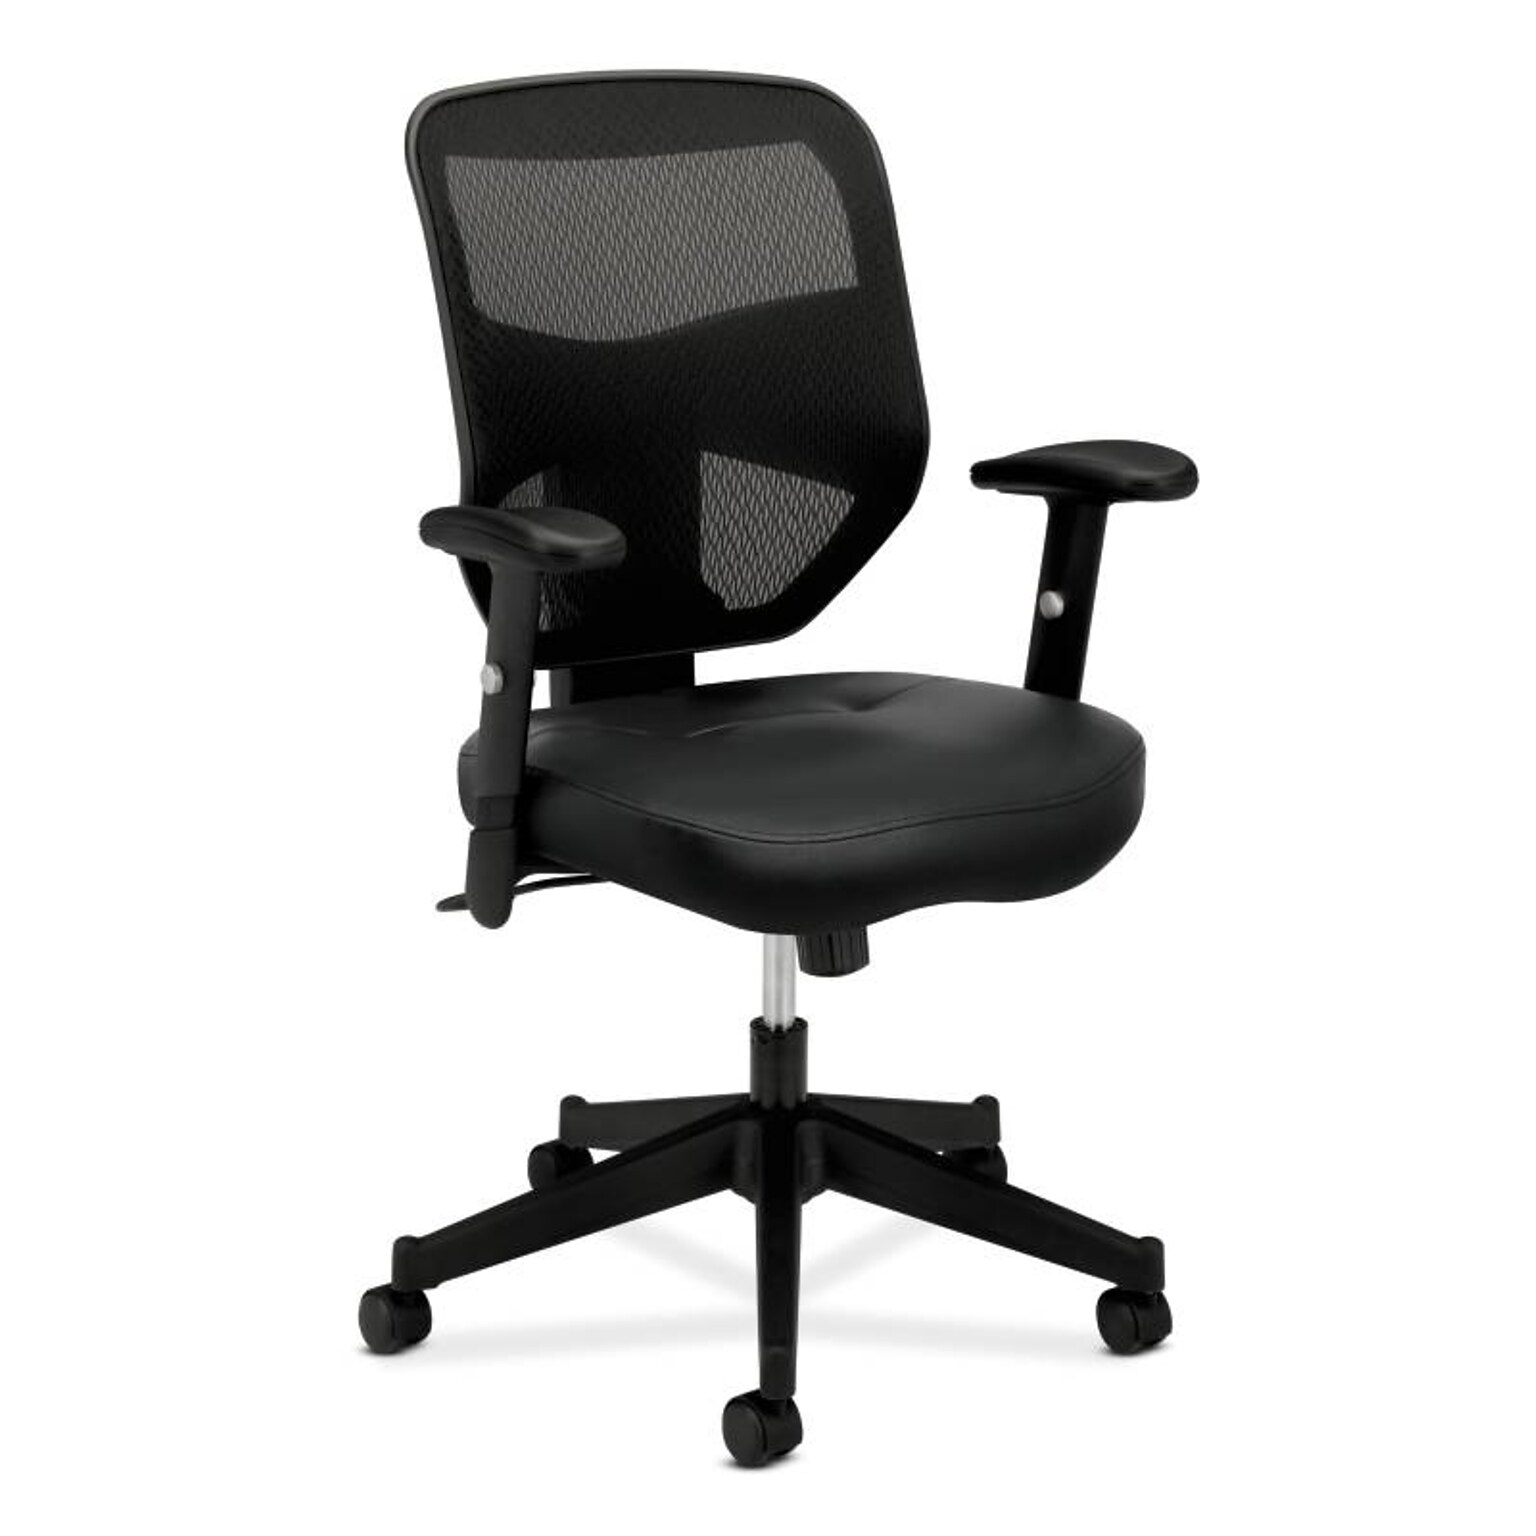 HON Prominent Mesh High-Back Task Chair, Adjustable Arms, Black SofThread Leather Seat (BSXVL531SB11)